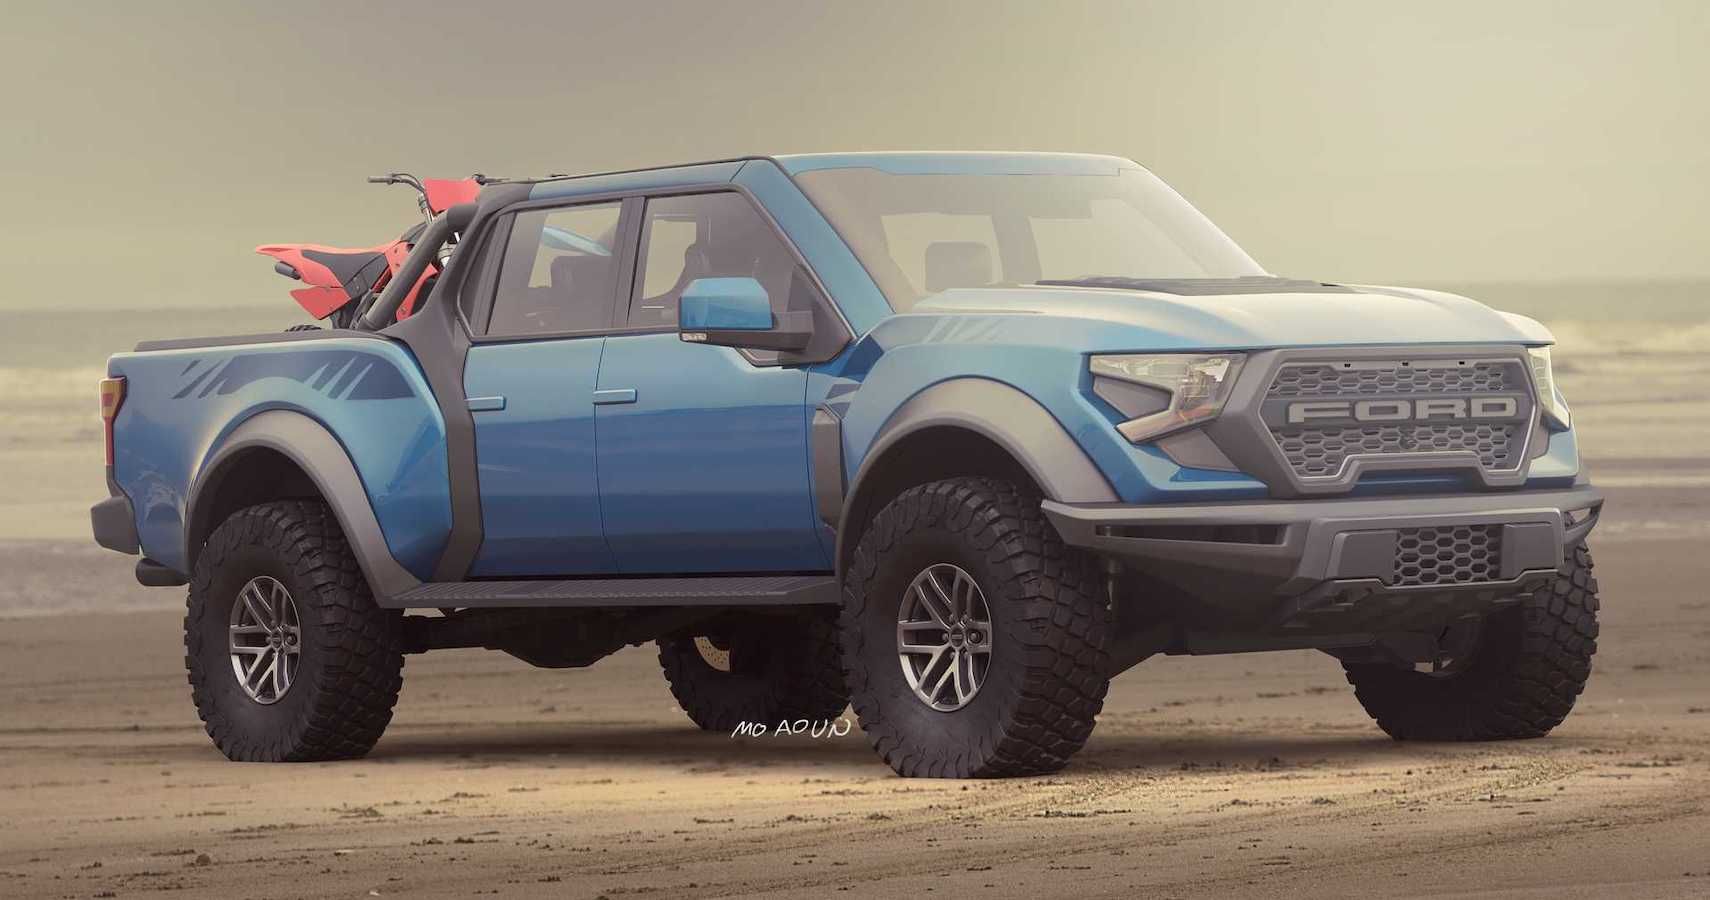 2021 Ford F-150 Raptor: The Official Reveal Is 24 Hours Away - Here's